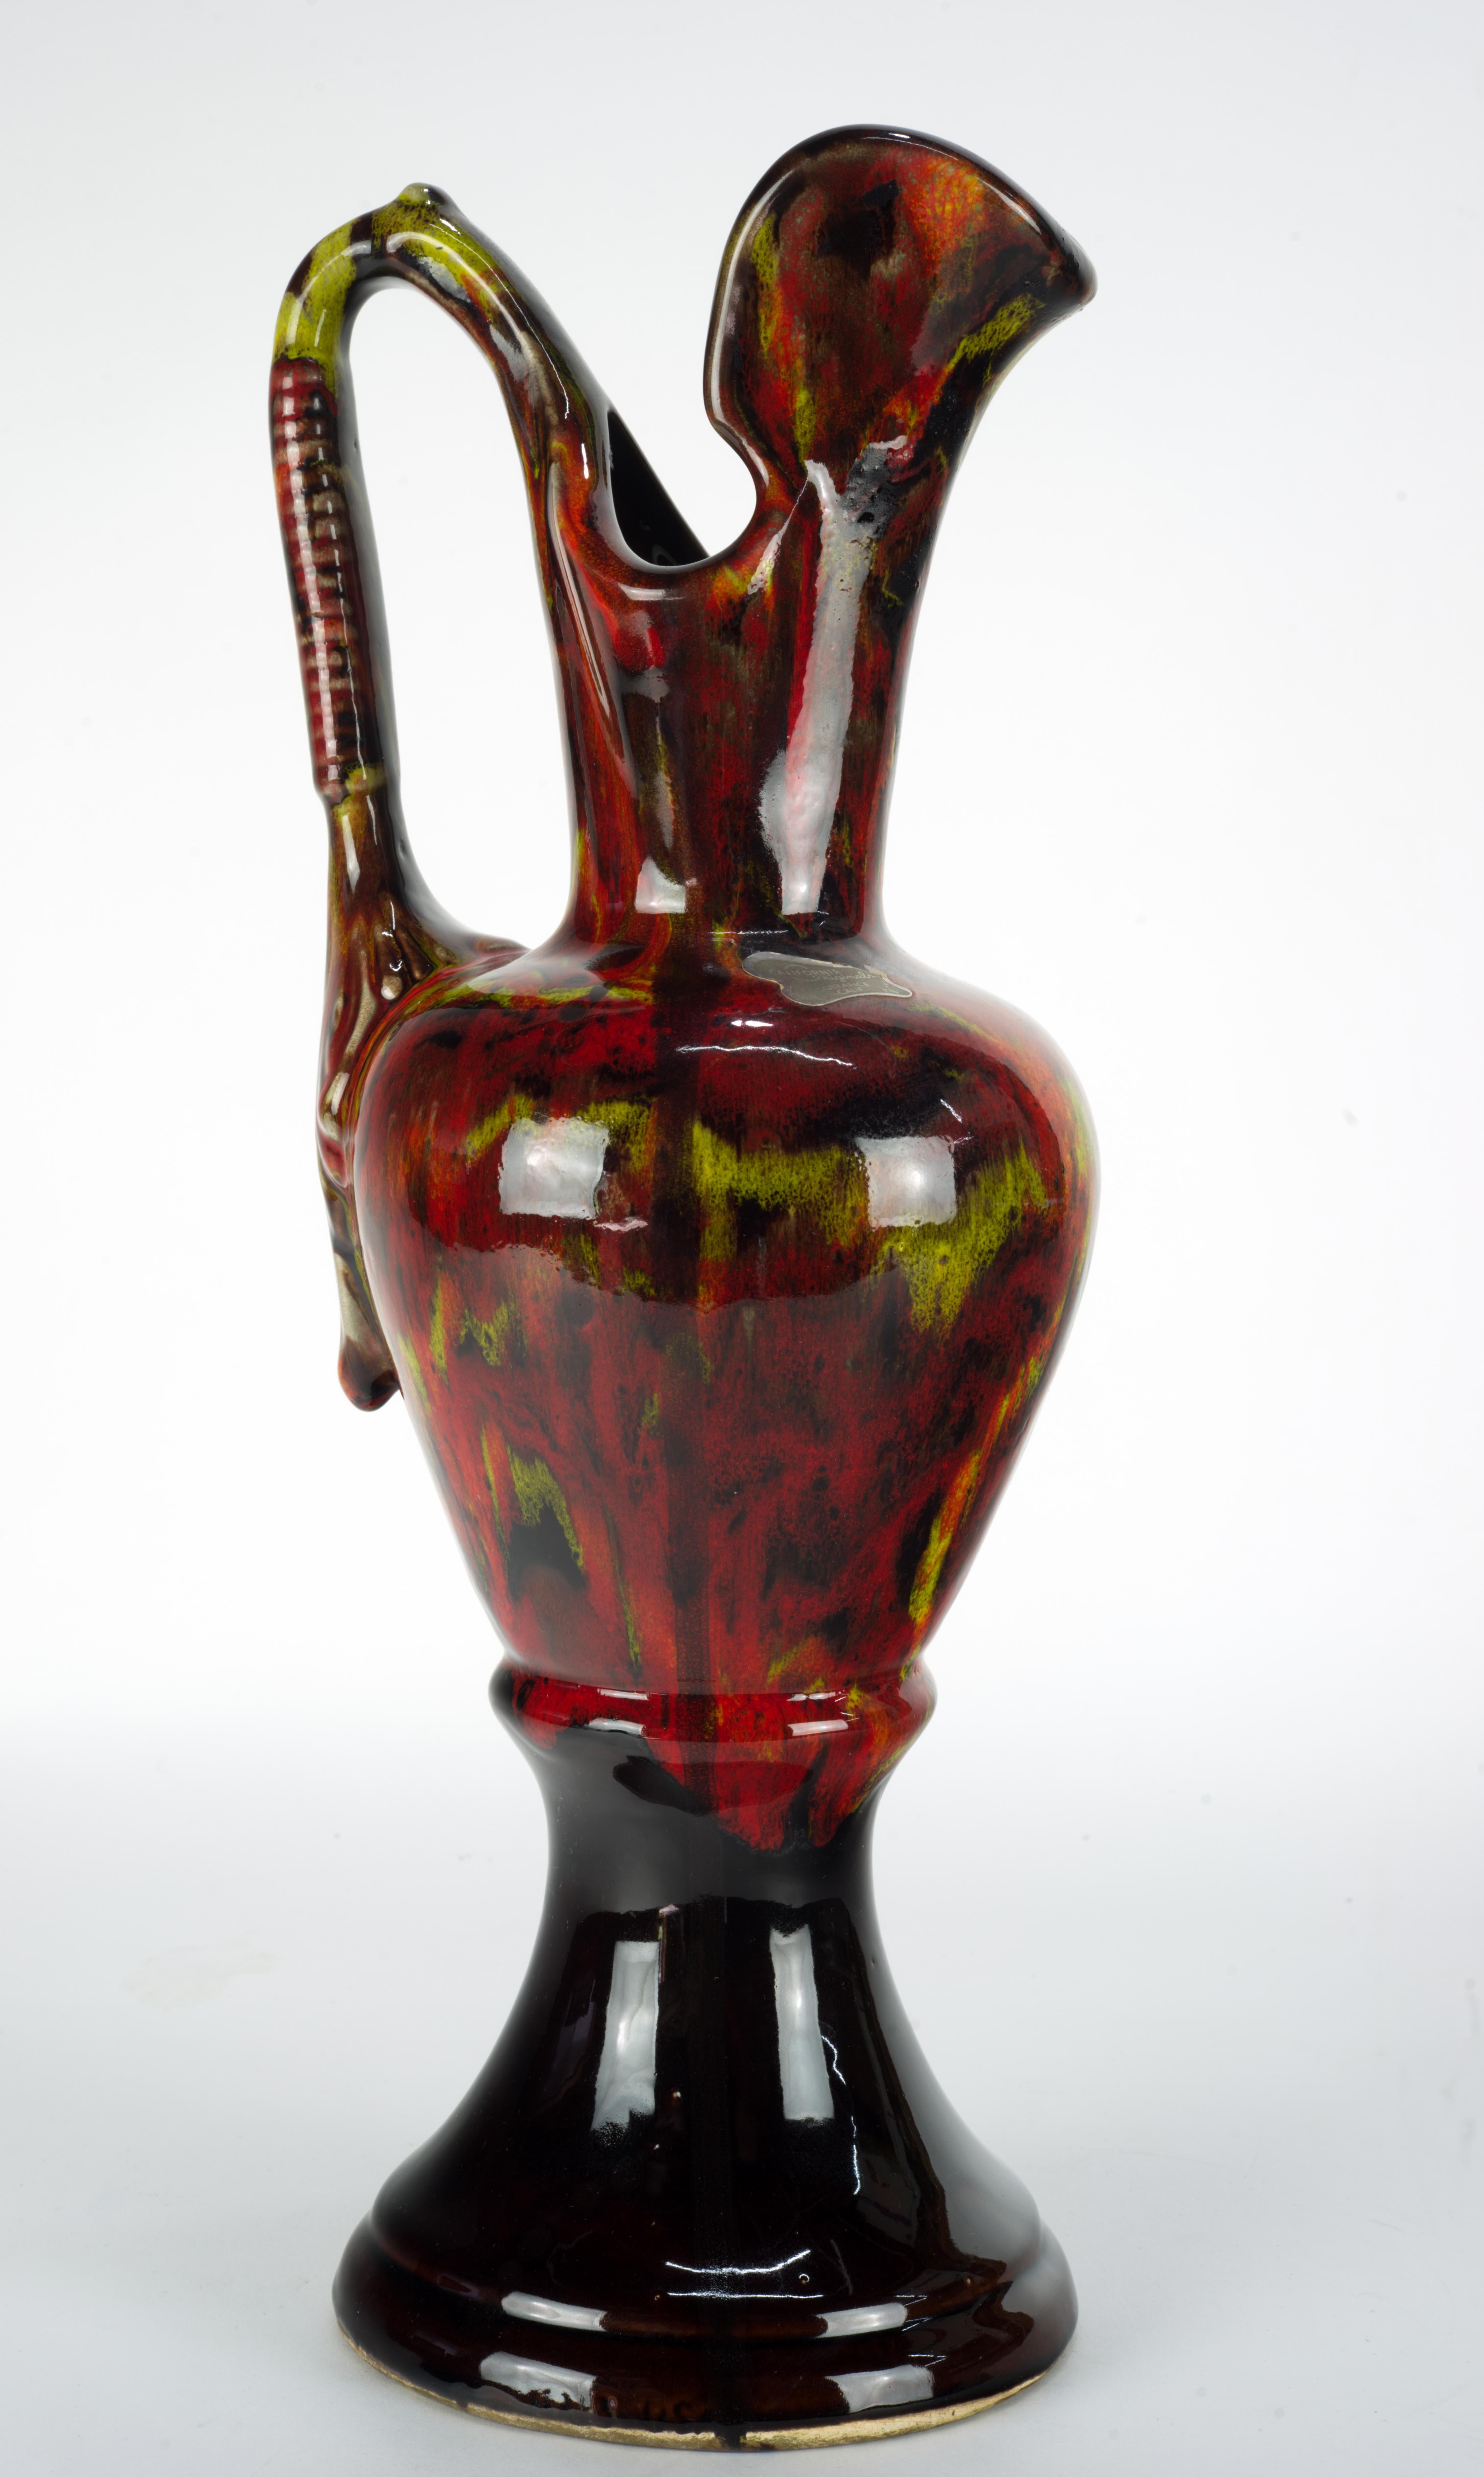  Bright and distinct ewer vase was made by California Originals pottery in 1950s-1960s. It is decorated with intense multicolored drip glaze in red and yellow palette on black background; monochromatic black base contrasts and intensifies the colors